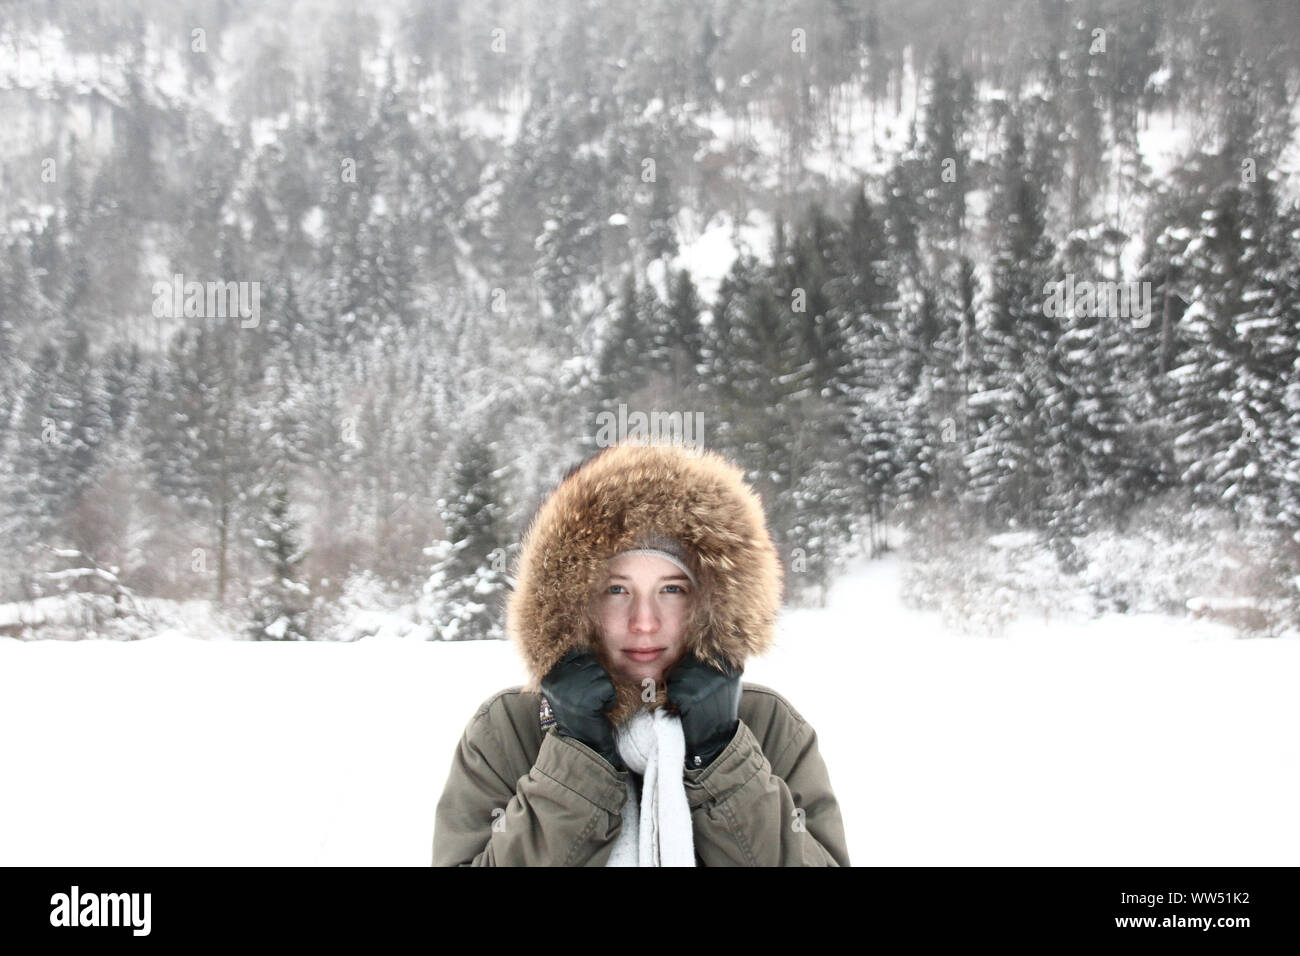 Young woman with fur hood in wintry landscape, Stock Photo